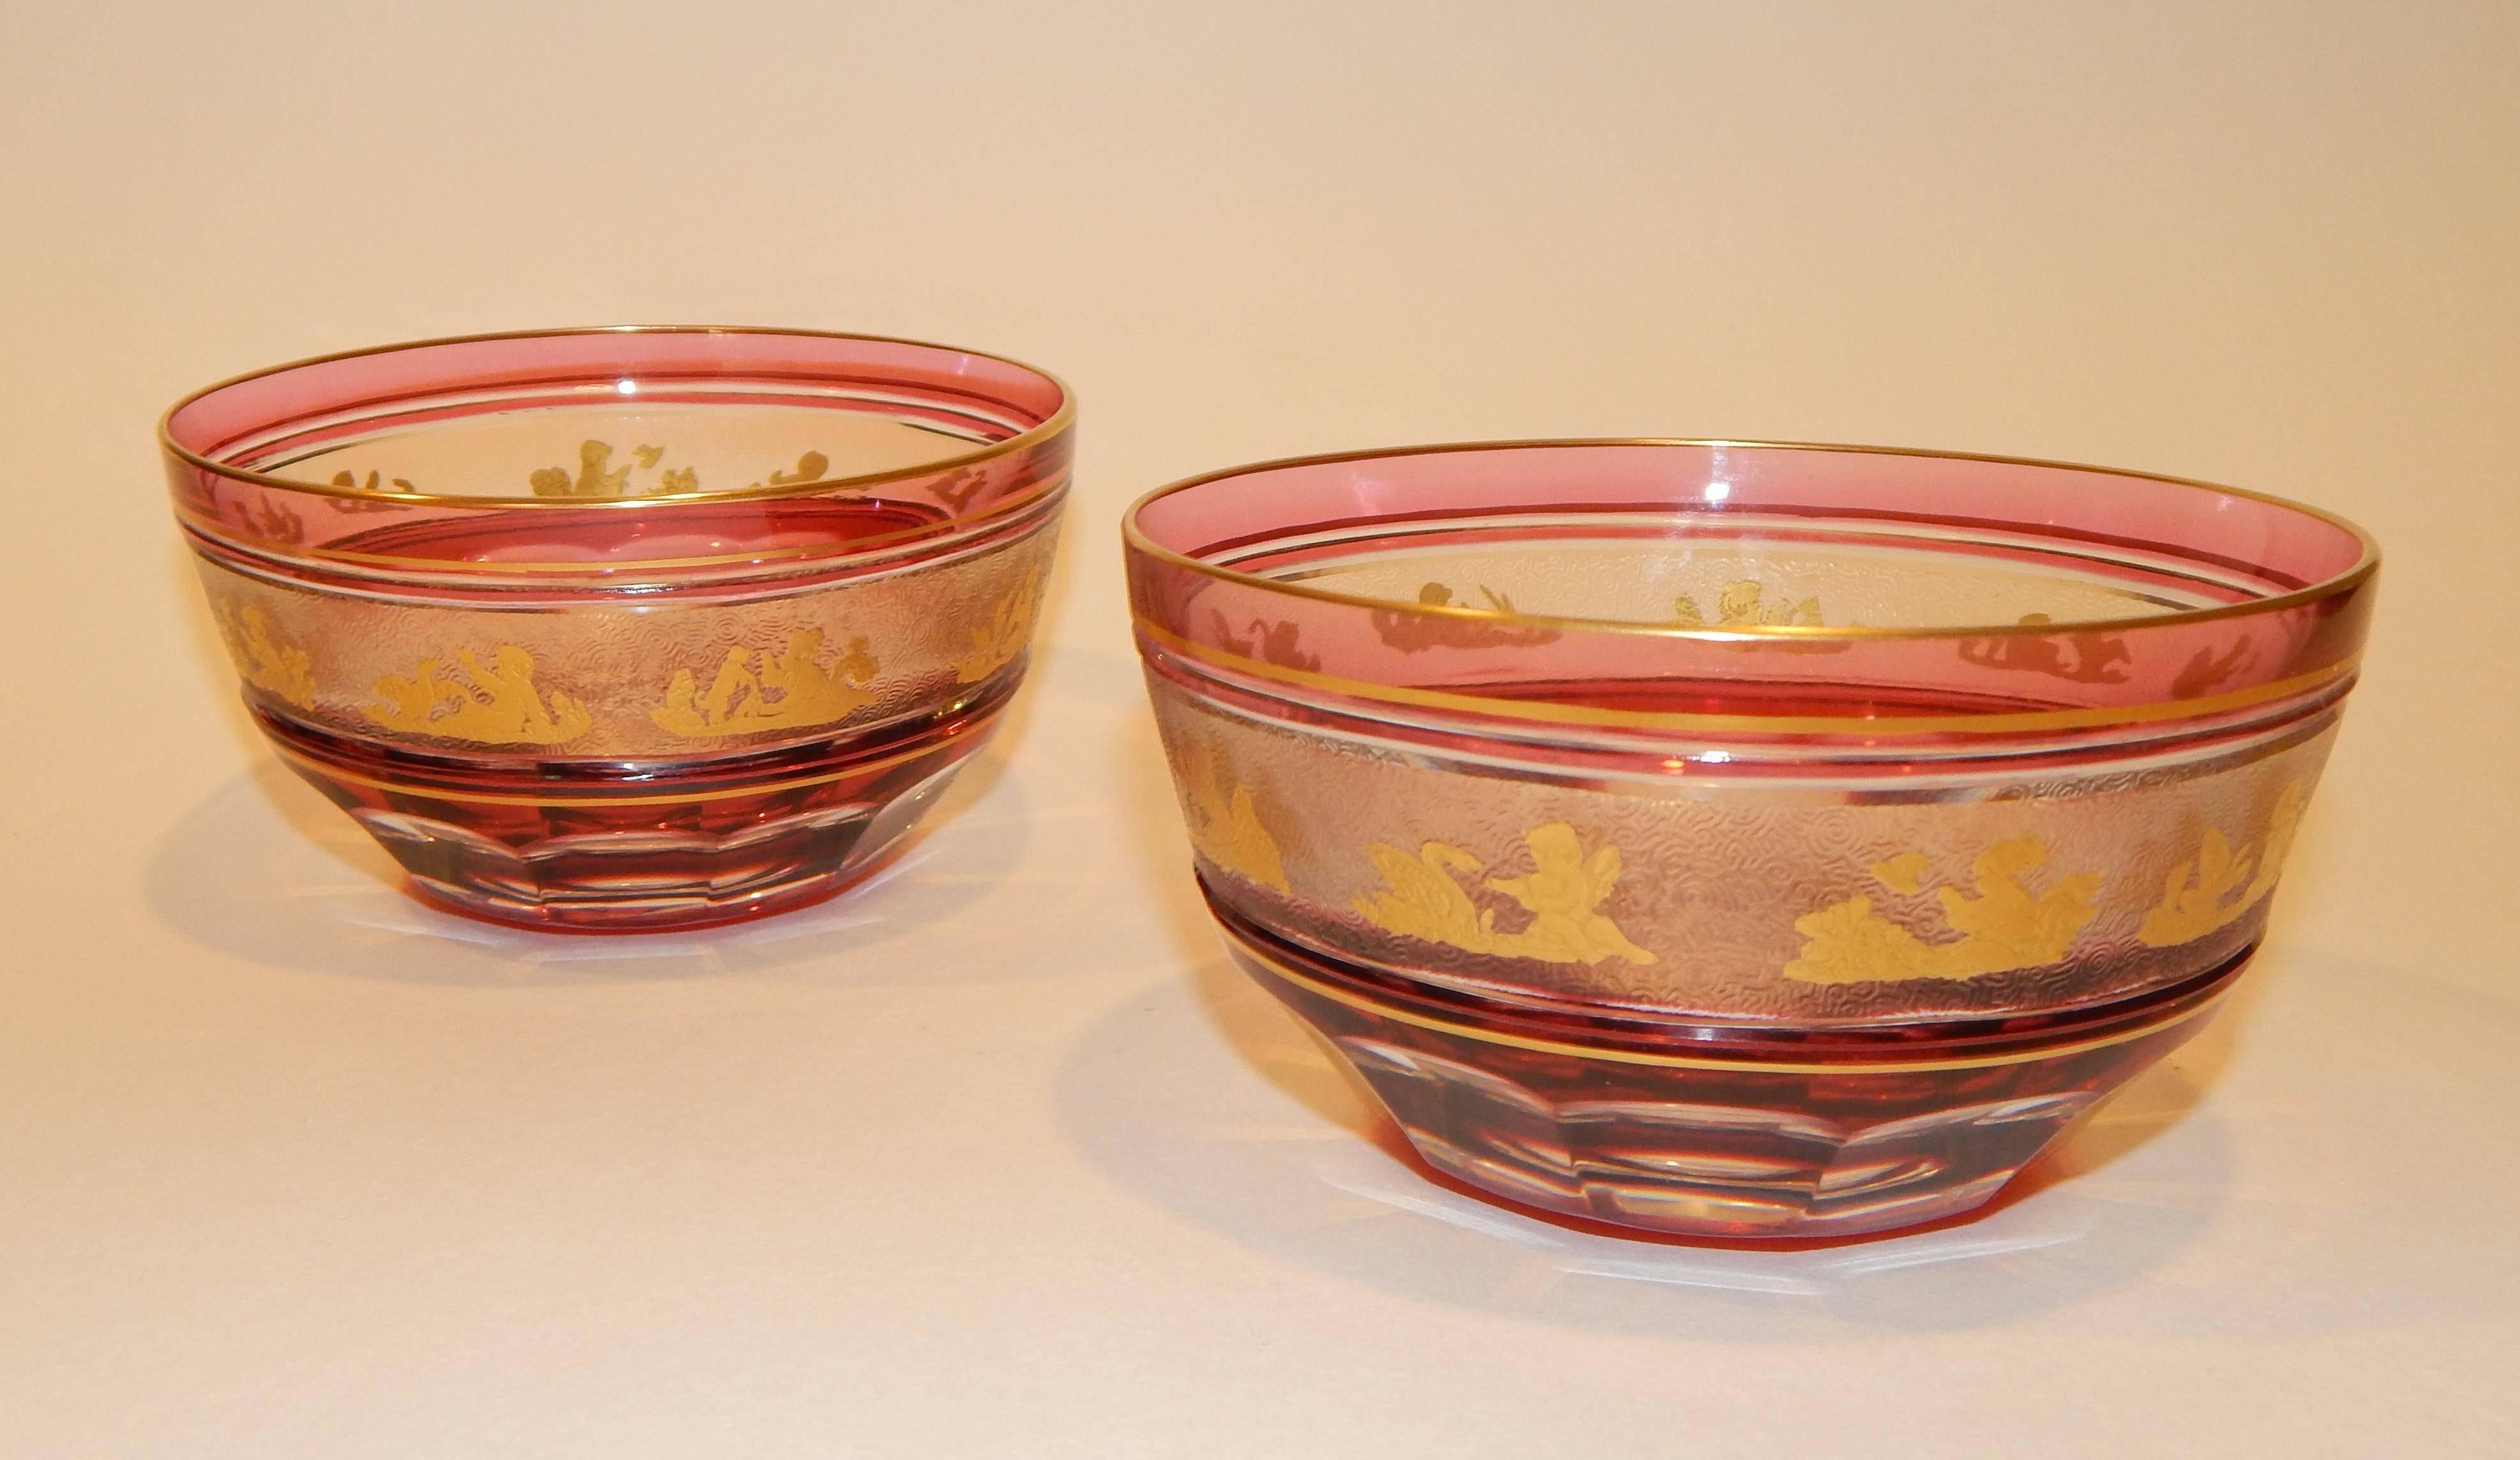 Val Saint Lambert Pair of Glass Dessert Bowls - Cranberry and Clear In Excellent Condition For Sale In Phoenix, AZ